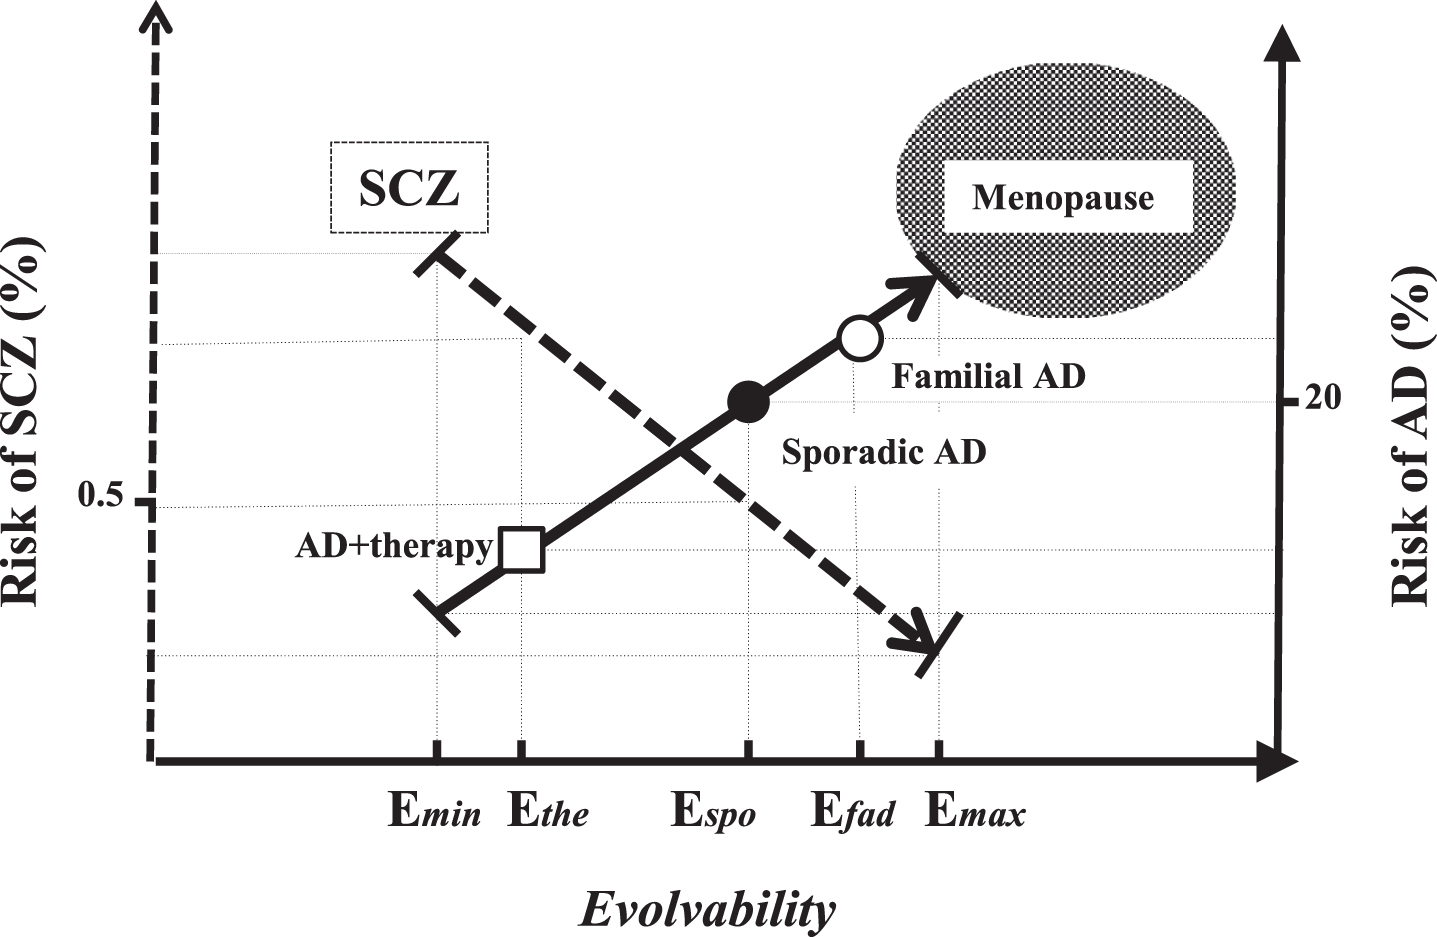 Schematic representation of the reciprocal transgenerational relationship between AD and SCZ through evolvability. Given that transmission of APs may confer the information on stressors from parental brain, resulting in suppression of SCZ, evolvability of the APs protofibrils would be beneficial for offspring. Therefore, AD would be inevitable in which the minimum of evolvability is required to reduce the risk of SCZ in offspring (Emin). The activity of evolvability may gradually increase, but AD is not manifested earlier before the postmenopausal period because of the law of natural selection. Accordingly, it is predicted that evolvability has a maximal point (Emax) in which the incidence of SCZ is compromised. Currently, the epidemiological data suggest the risk of SCZ is estimated to be 0.2∼0.5% [33], while the risk of AD is approximately ∼20% (Ecurr) [34]. It is suggested that the activity of the evolvability derived from familial AD should be higher than that derived from sporadic AD, being closer to Emax (Efad), and foretells that the incidence of SCZ among familial AD should be below the average. In contrast, the activity of evolvability might be decreased in AD patients treated with disease-modifying therapy (Edmt), in which the risk of SCZ in offspring might be increased. Thus, it is theoretically predicted that parental AD and SCZ in offspring might exist in a reciprocal relationship through evolvability. •: Current average of sporadic AD, ∘: familial AD, □: AD patients treated with disease-modifying therapy.